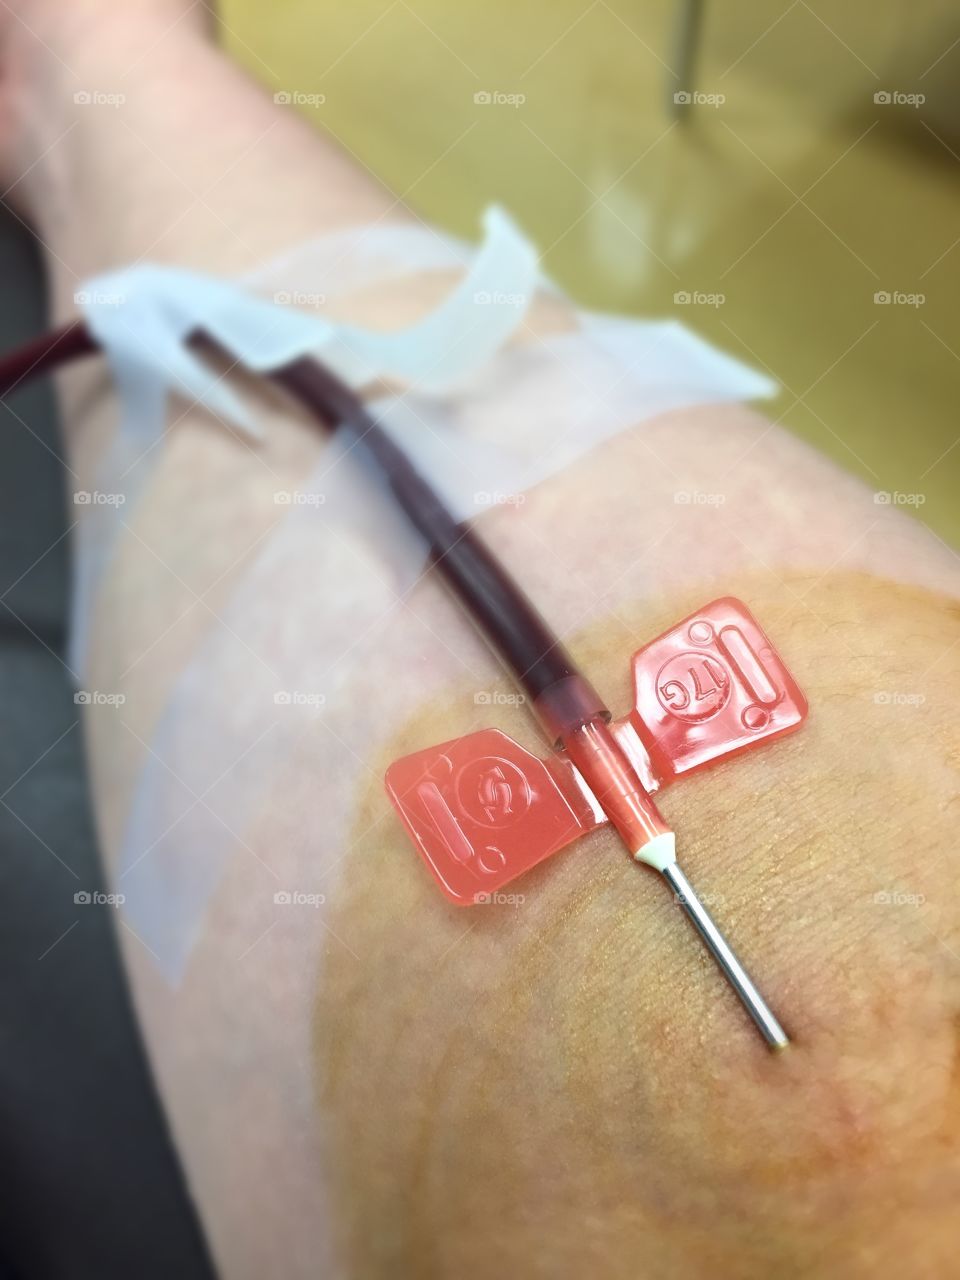 Donating plasma is a good way to make money and save lives!